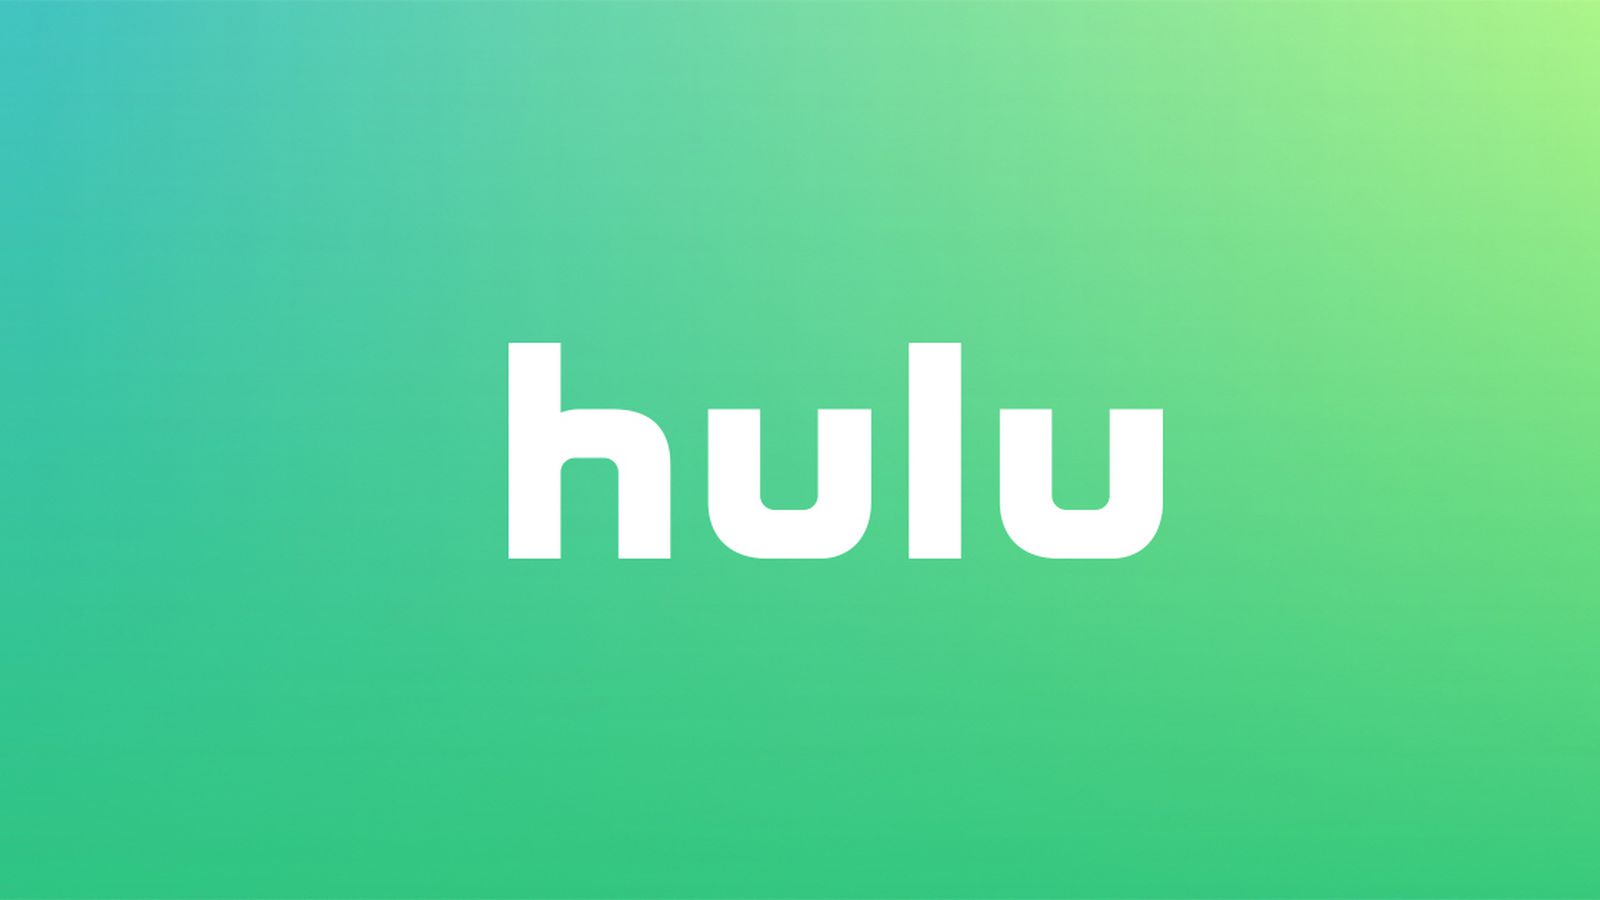 How To Get Rid Of Ads On Hulu For Free Reddit